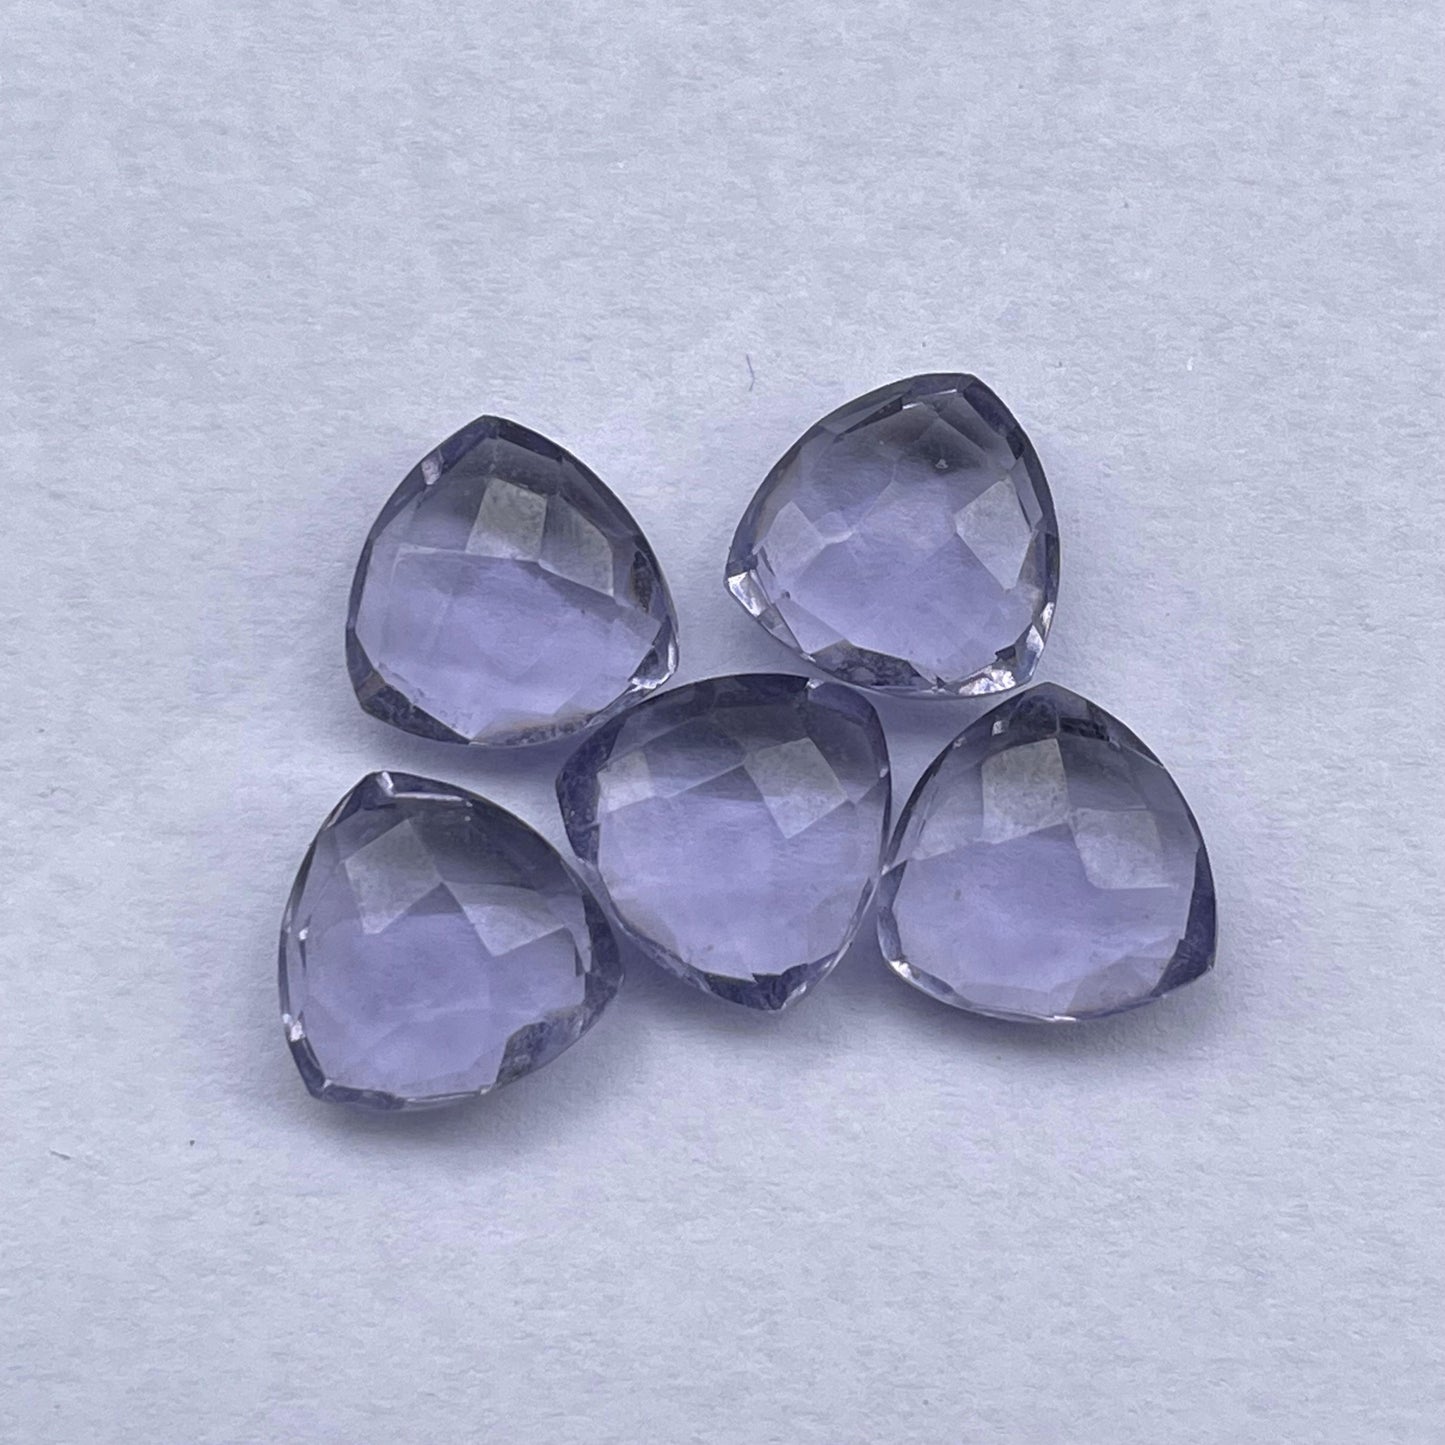 Amethyst Faceted Nice Quality (10 mm) Briolette (Lab Created)